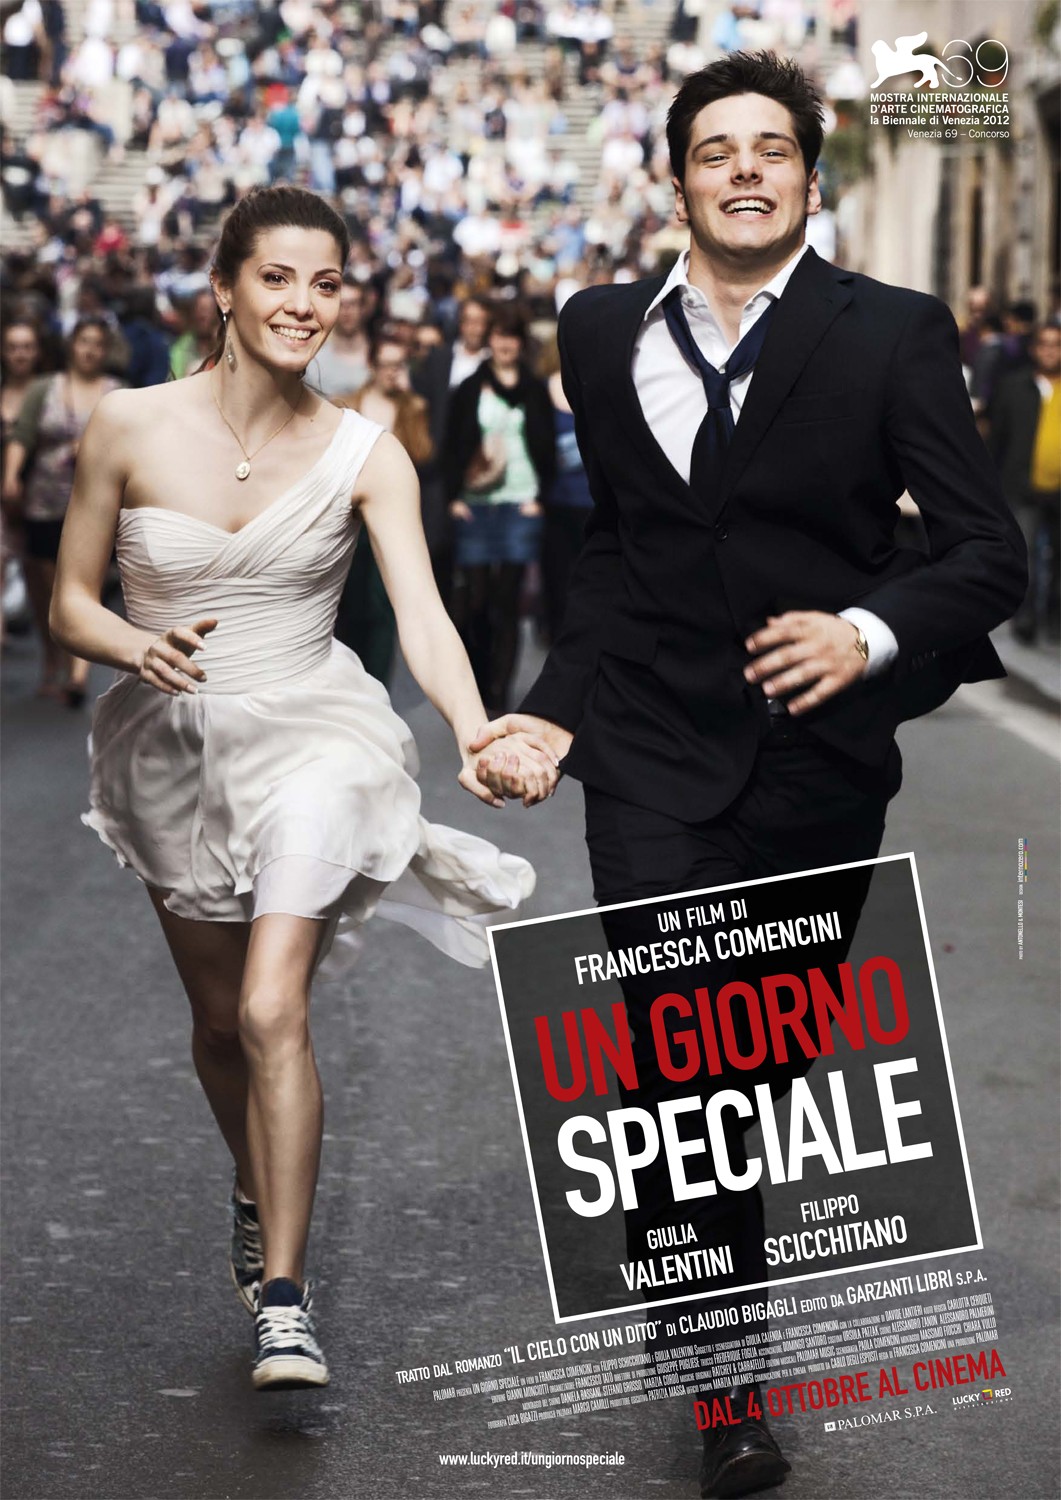 Extra Large Movie Poster Image for Un giorno speciale 